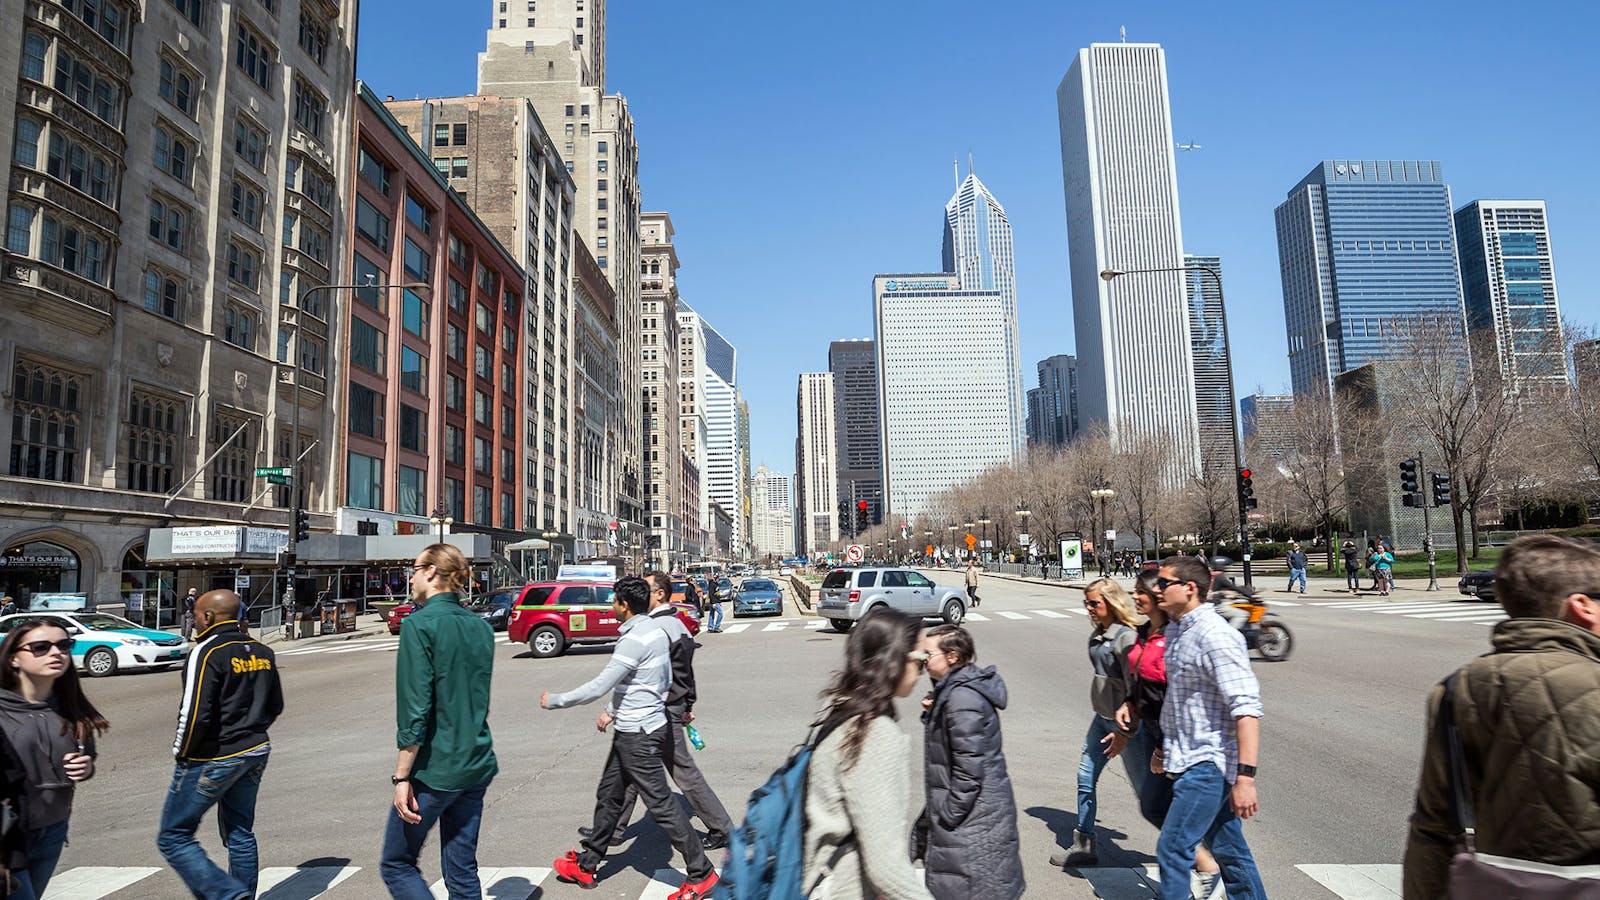 Lyric manages high-end rentals for short stays in Chicago, above, and a dozen other cities. Photo: Shutterstock